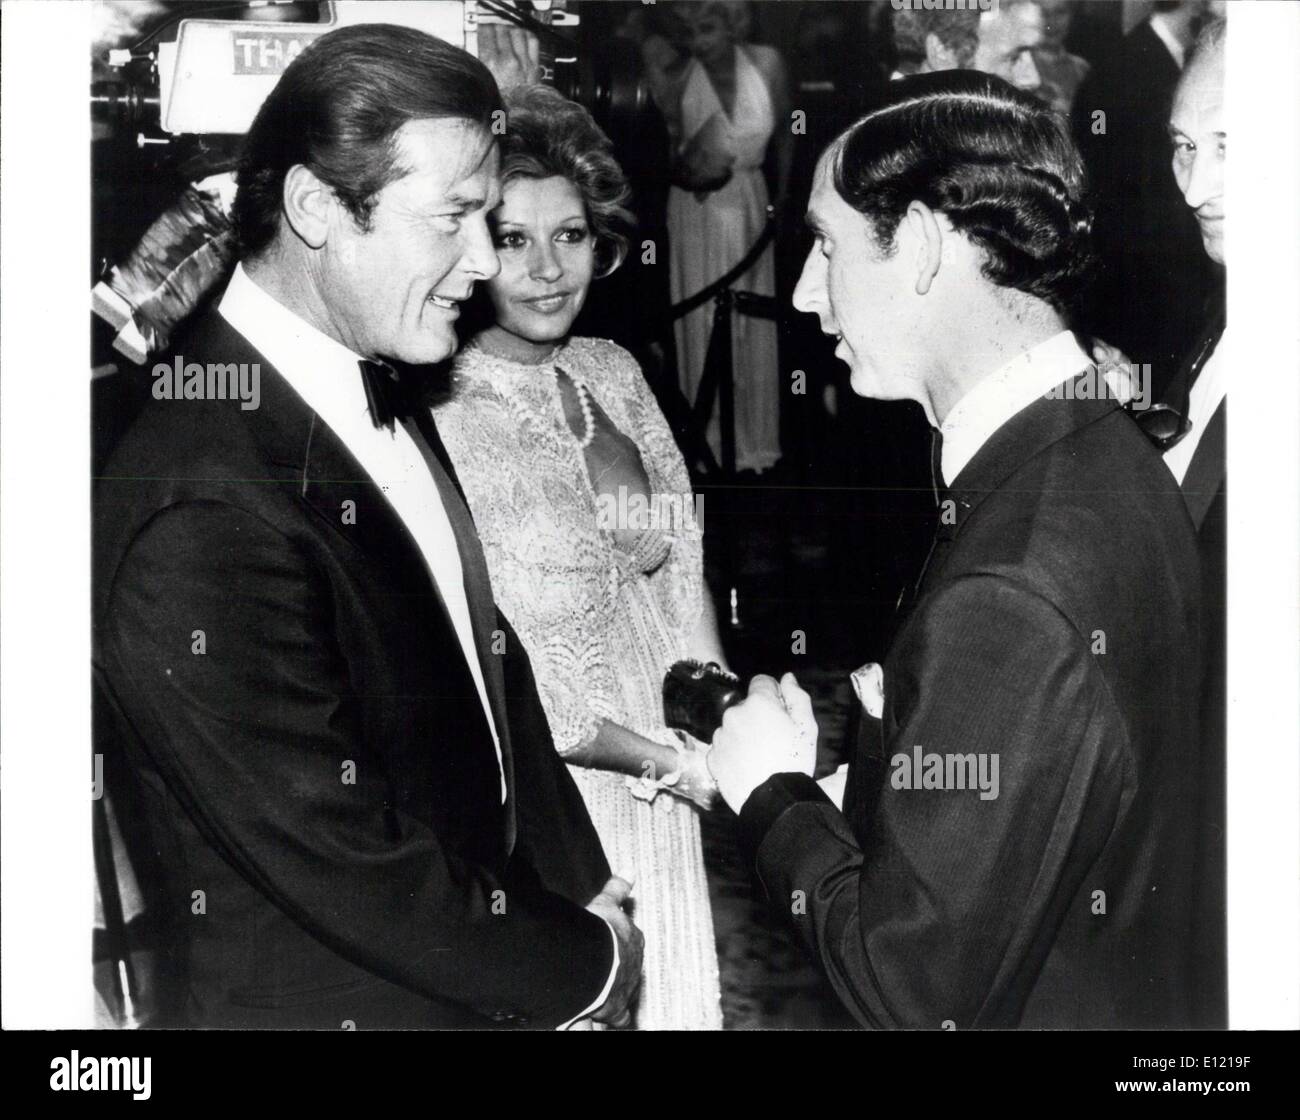 Jun. 25, 1981 - Premiere of the Latest James Bond Film 'For Your Eyes Only': Last night at the Odeon Leicester Square, Prince Charles and Lady Diana attended the premiere of the latest James Bond film, For Your Eyes Only. Photo Shows Prince seen talking to Roger Moore and his wife Luisa during last night's premiere of the James Bond film, For Your Eyes Only. Stock Photo